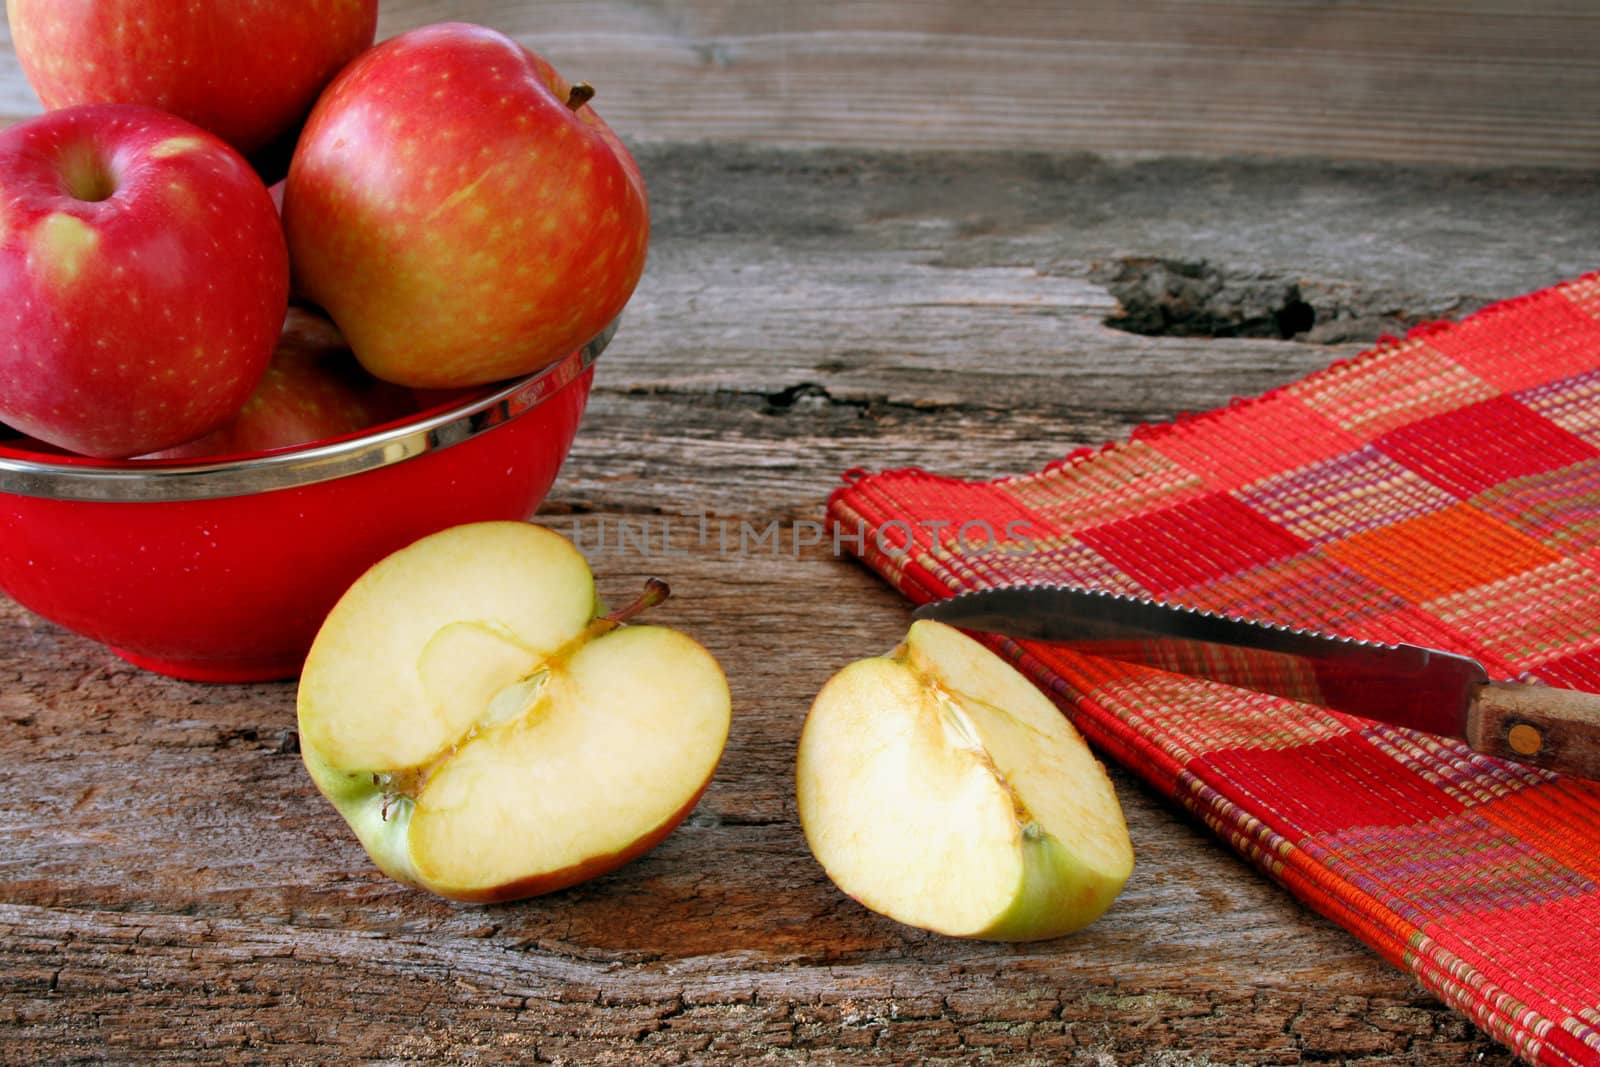 Sliced Apples by thephotoguy